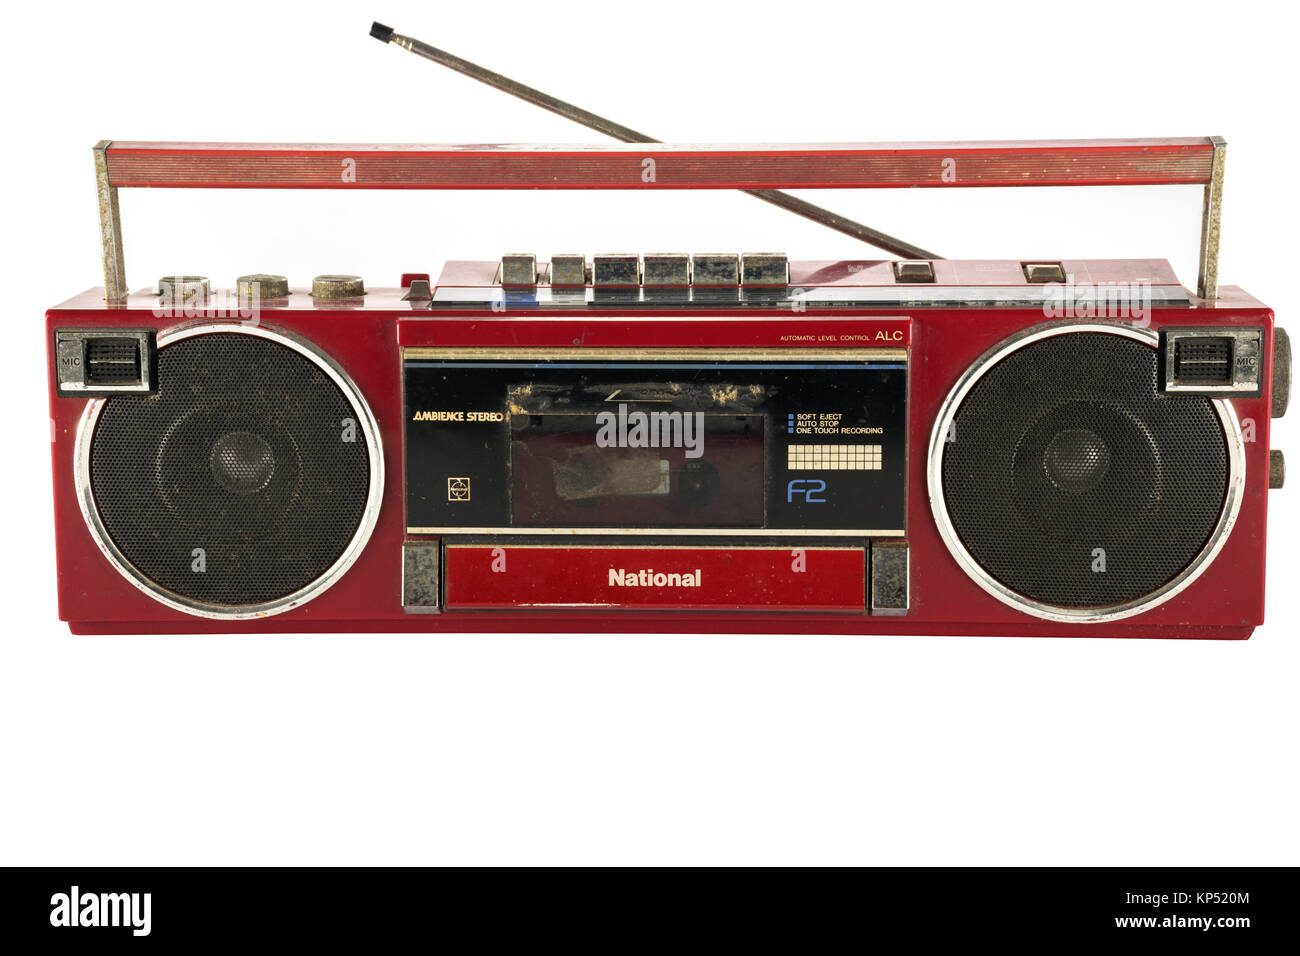 The old cassette player boombox headphone jack plugs into a